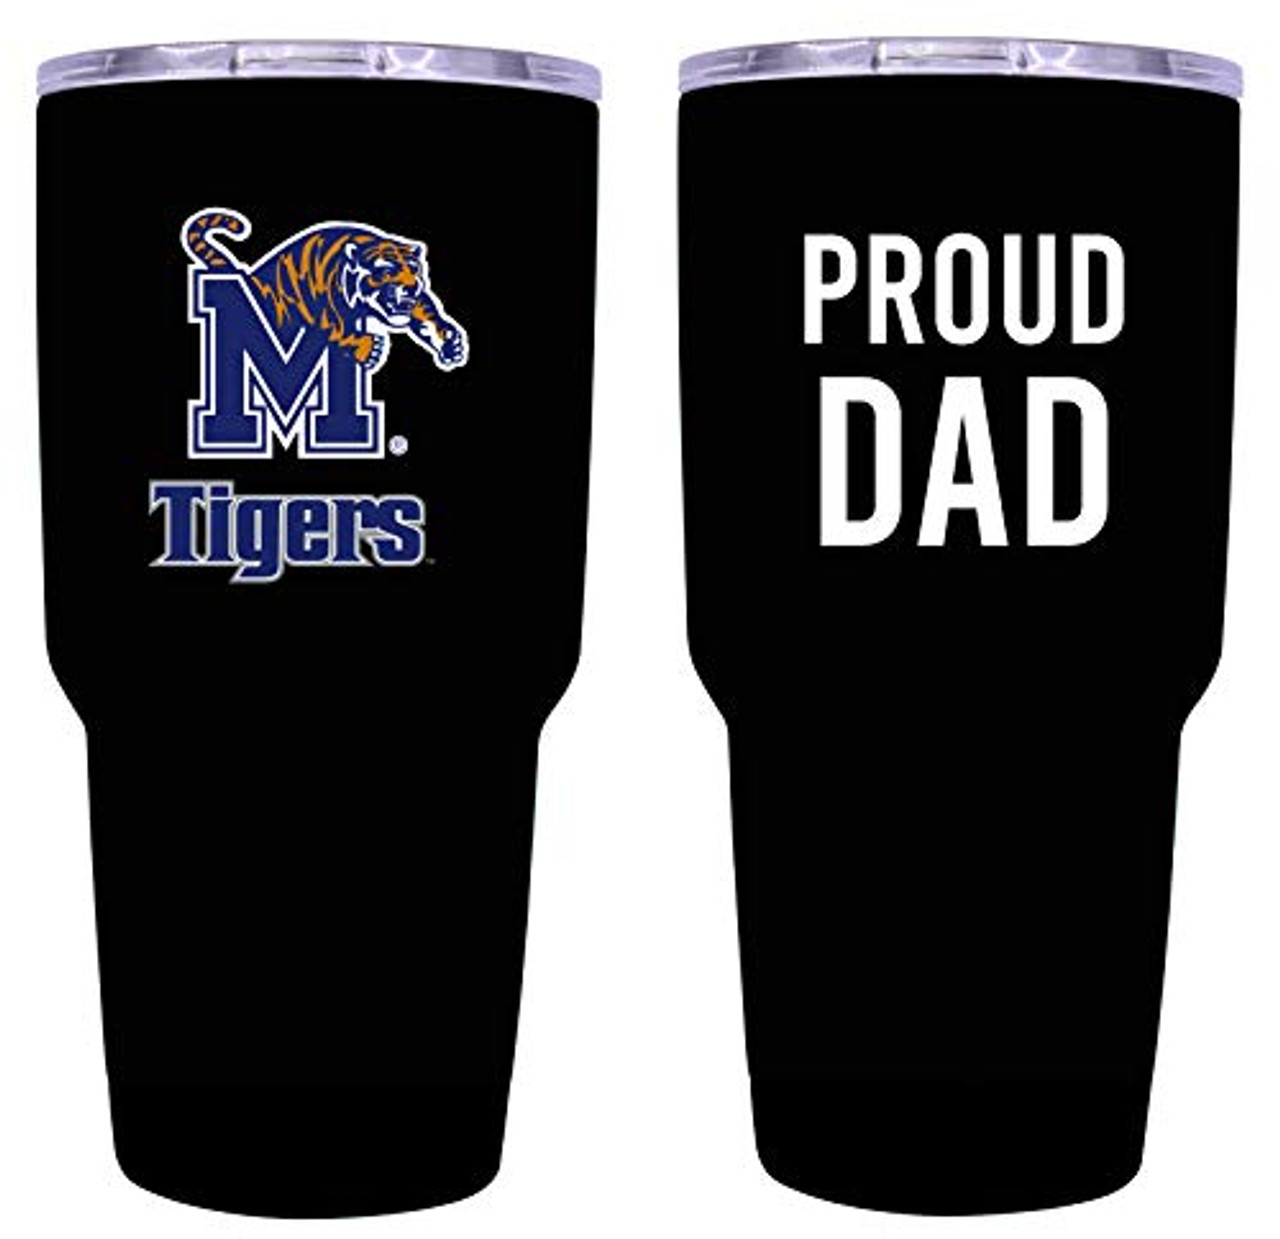 Memphis Tigers Proud Dad 24 oz Insulated Stainless Steel Tumblers Black.